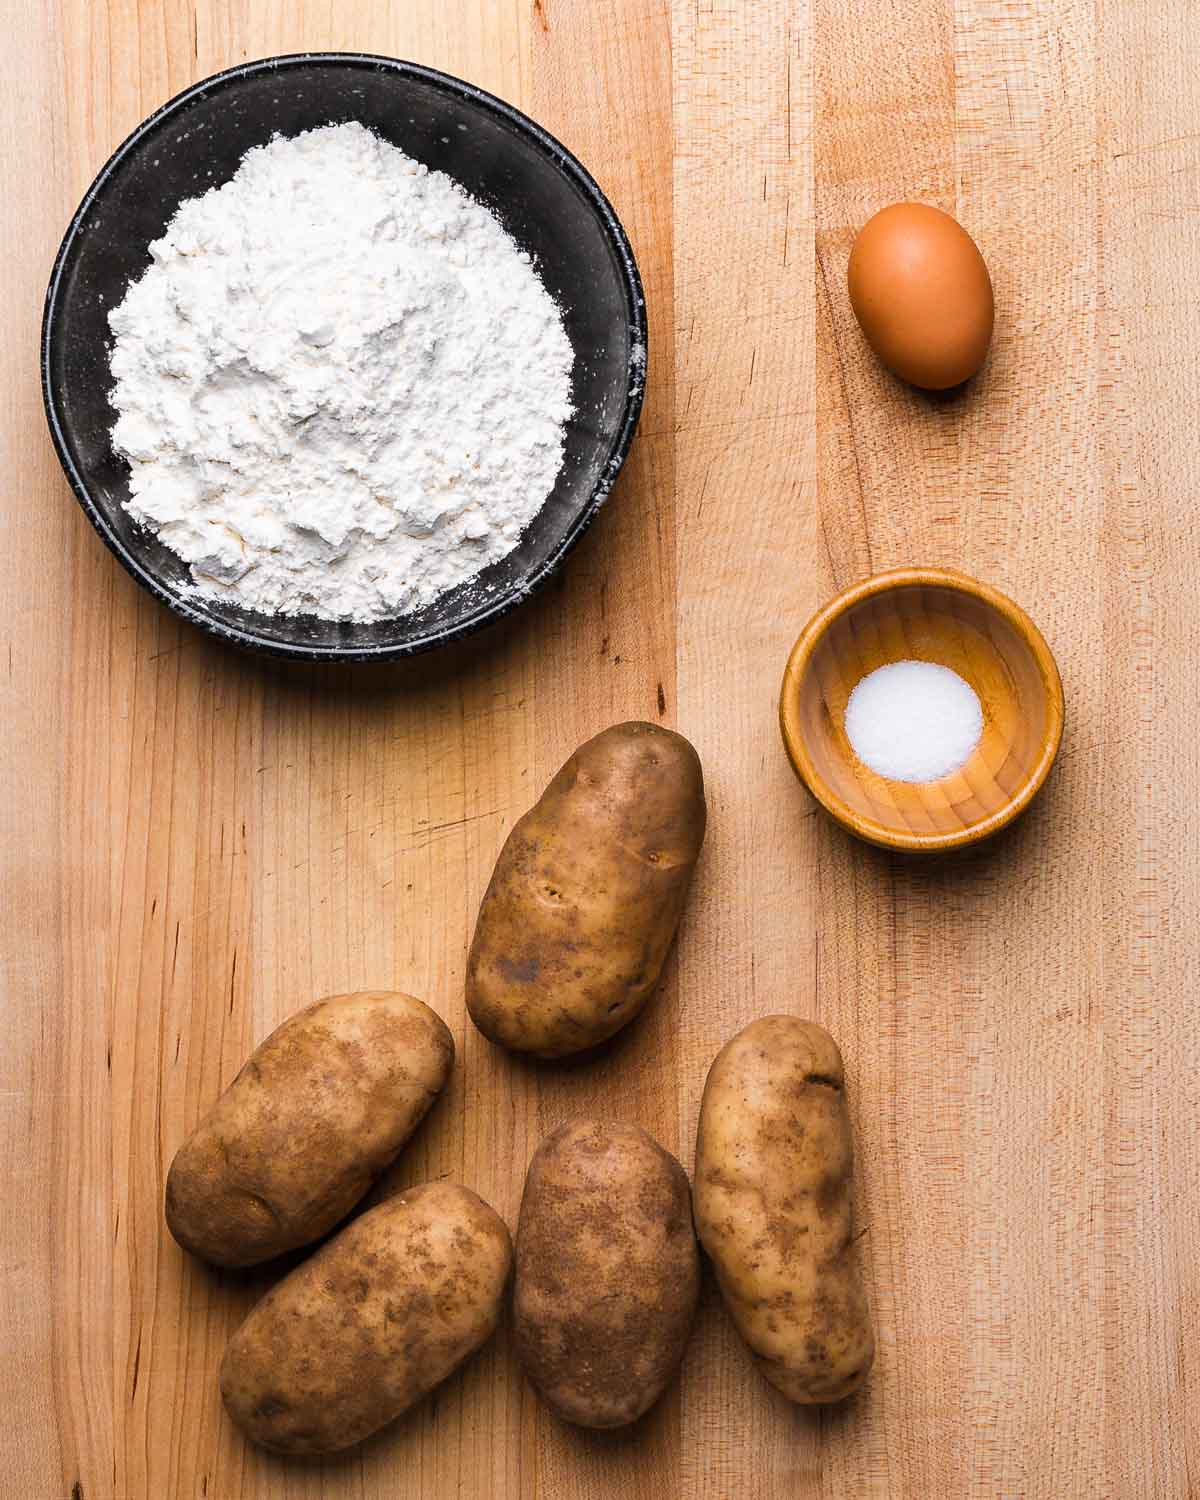 Ingredients shown: bowl of flour, egg, salt, and russet potatoes.